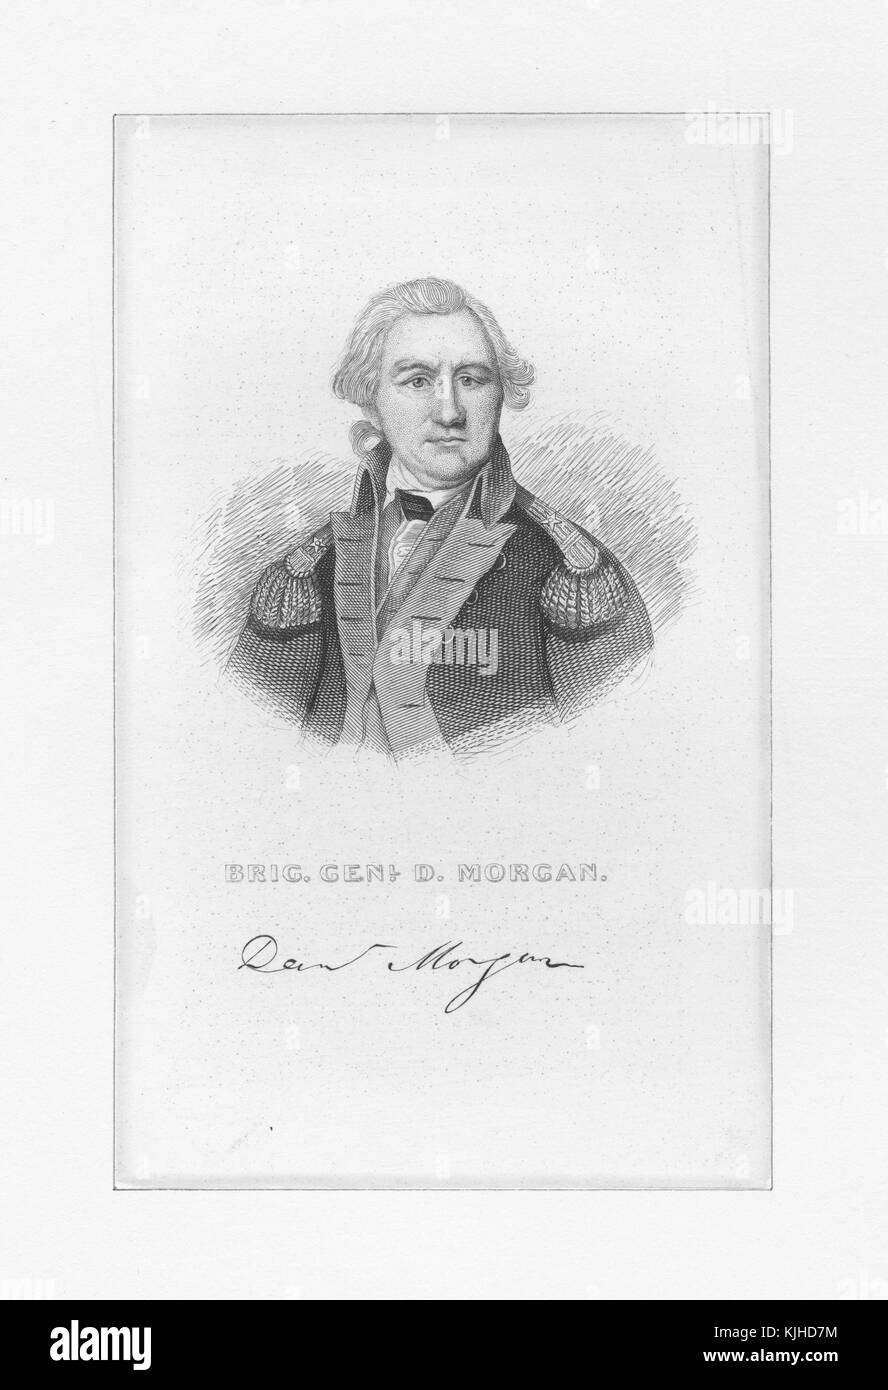 An etching from a portrait of Daniel Morgan, he was a soldier that eventually achieved the rank of brigadier general during the American Revolutionary War, at one point during the war he retired after being passed over for promotions because of his lack of political connections, he was known for being a particularly skilled tactician in battle, he went on to serve as a member of the United States House of Representatives from Virginia, 1834. From the New York Public Library. Stock Photo